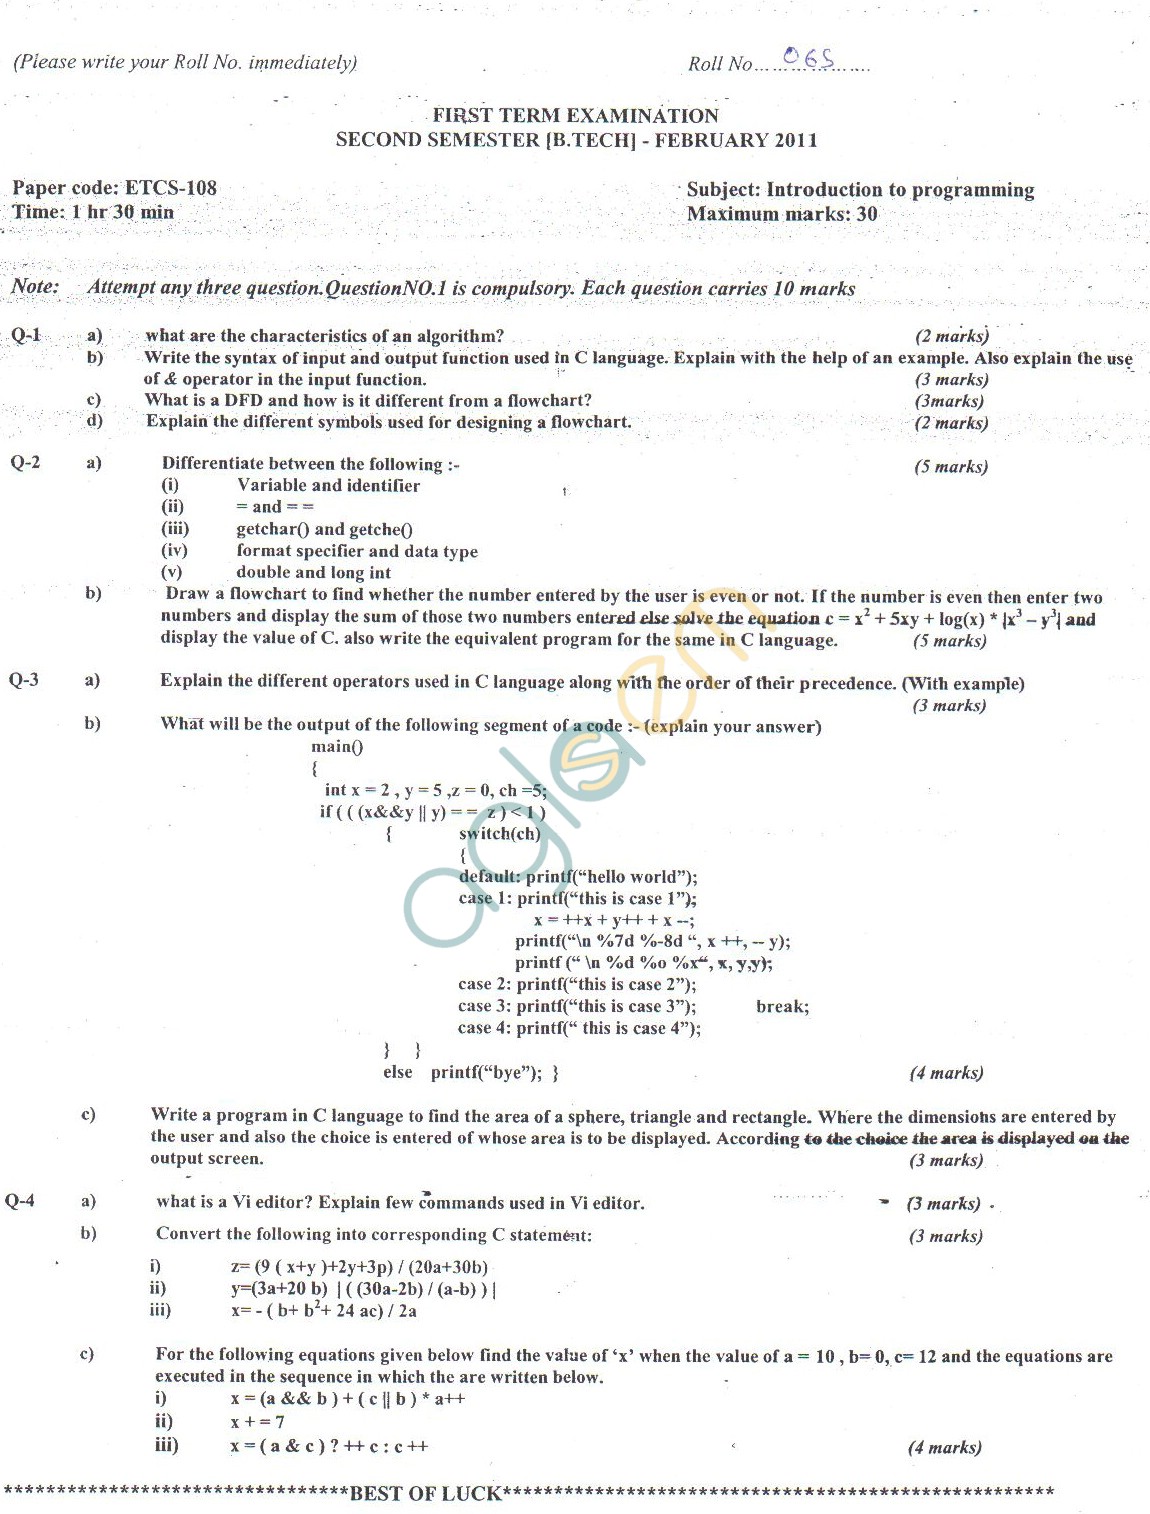 GGSIPU Question Papers Second Semester – First Term 2011 – ETCS-108